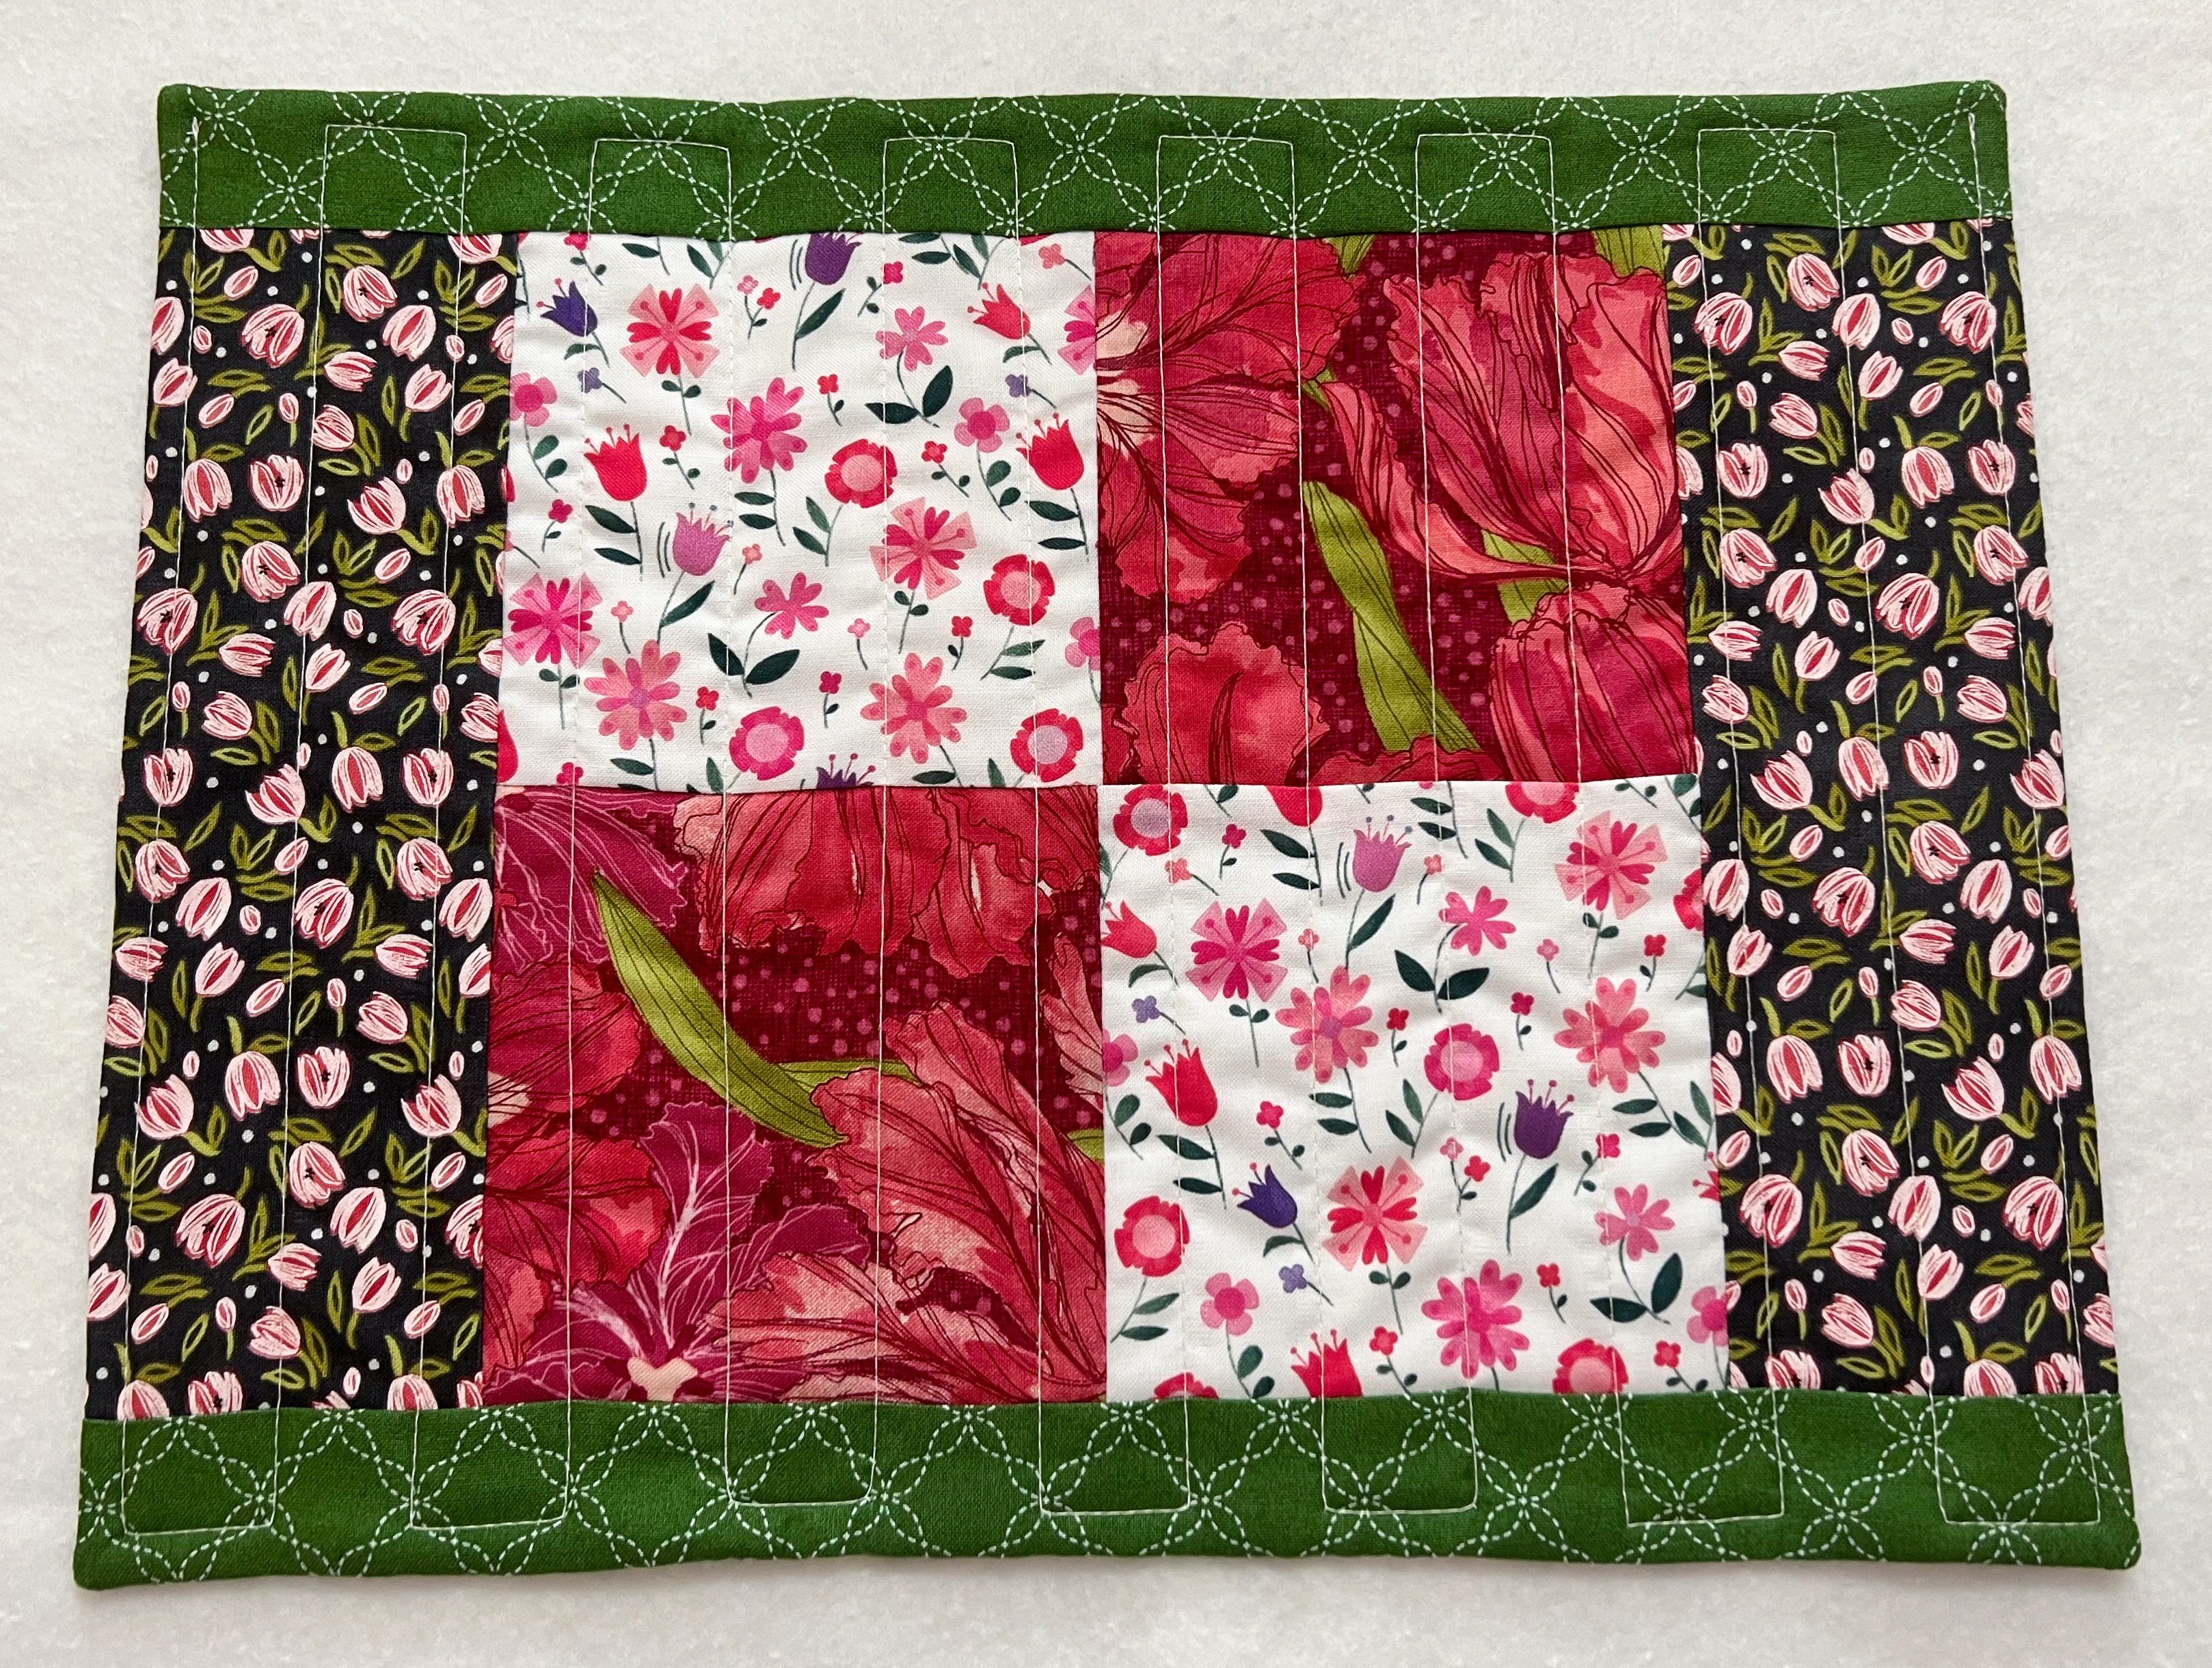 Quilted placemat in green, pink, and black floral fabrics